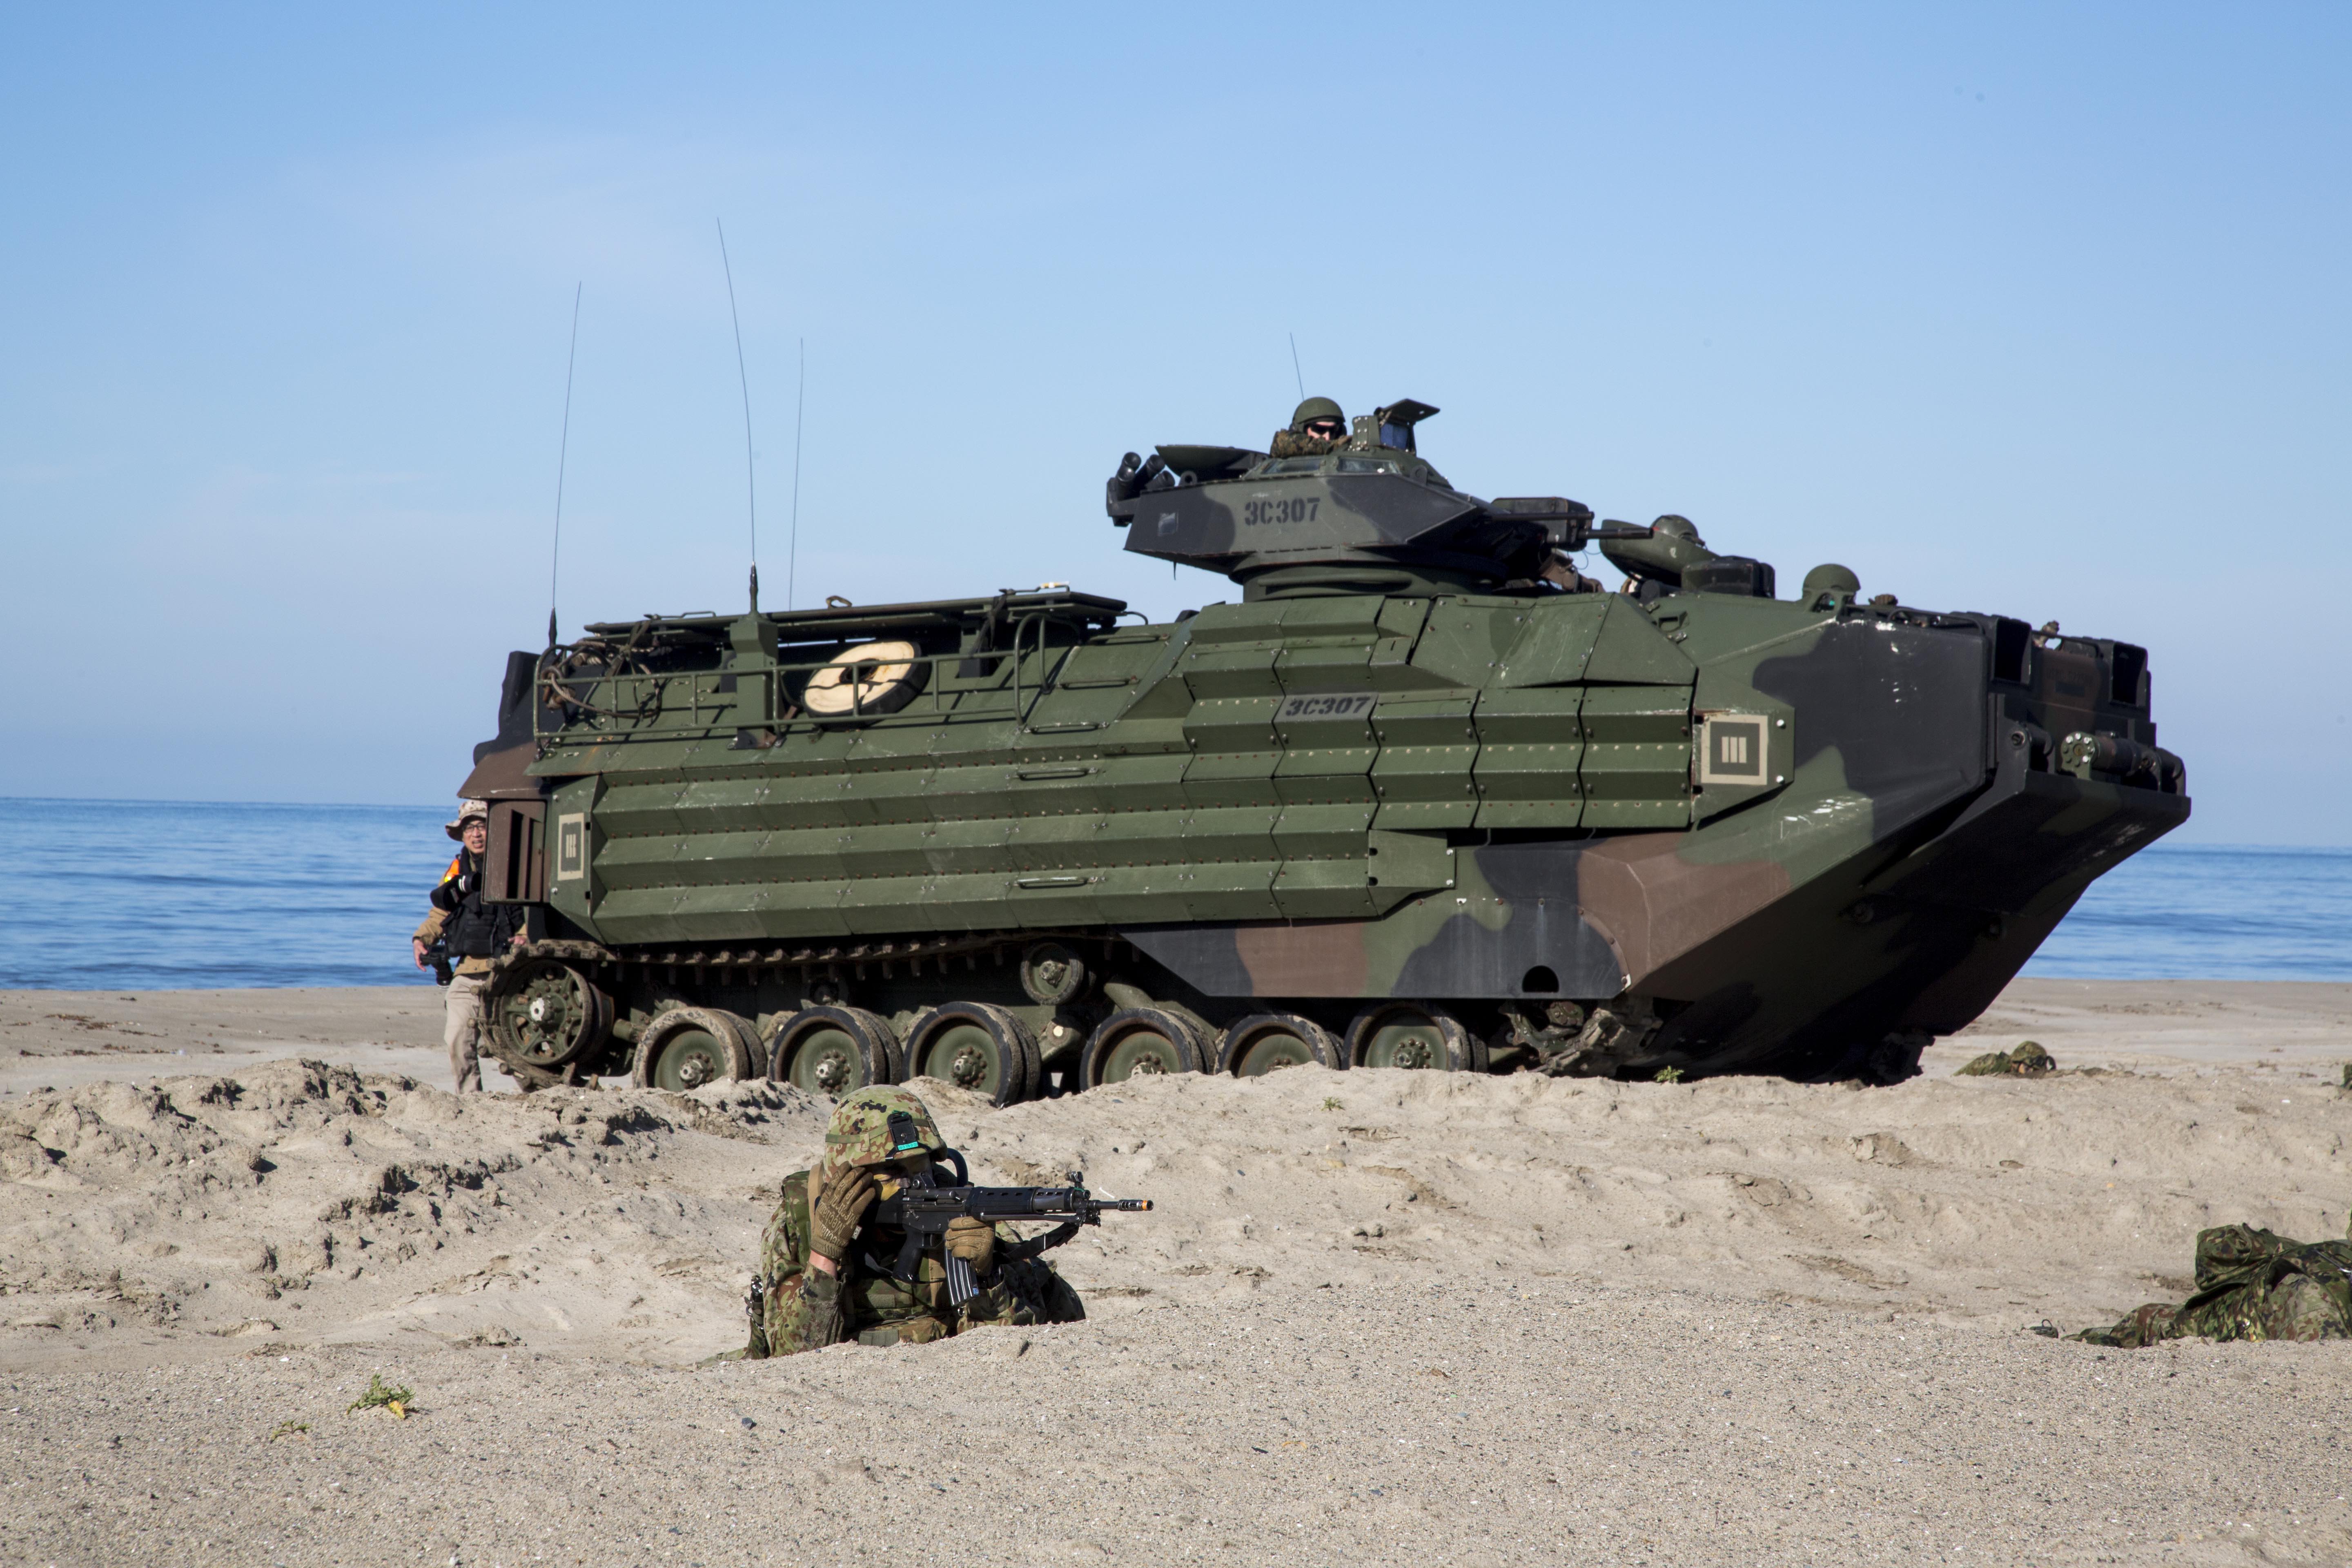 Japan Ground Self Defense Force soldiers establish security after exiting an Assault Amphibian Vehicle, during Exercise Iron Fist 2017, aboard Marine Corps Base Camp Pendleton, Calif. on Feb. 25, 2017. US Marine Corps Photo 